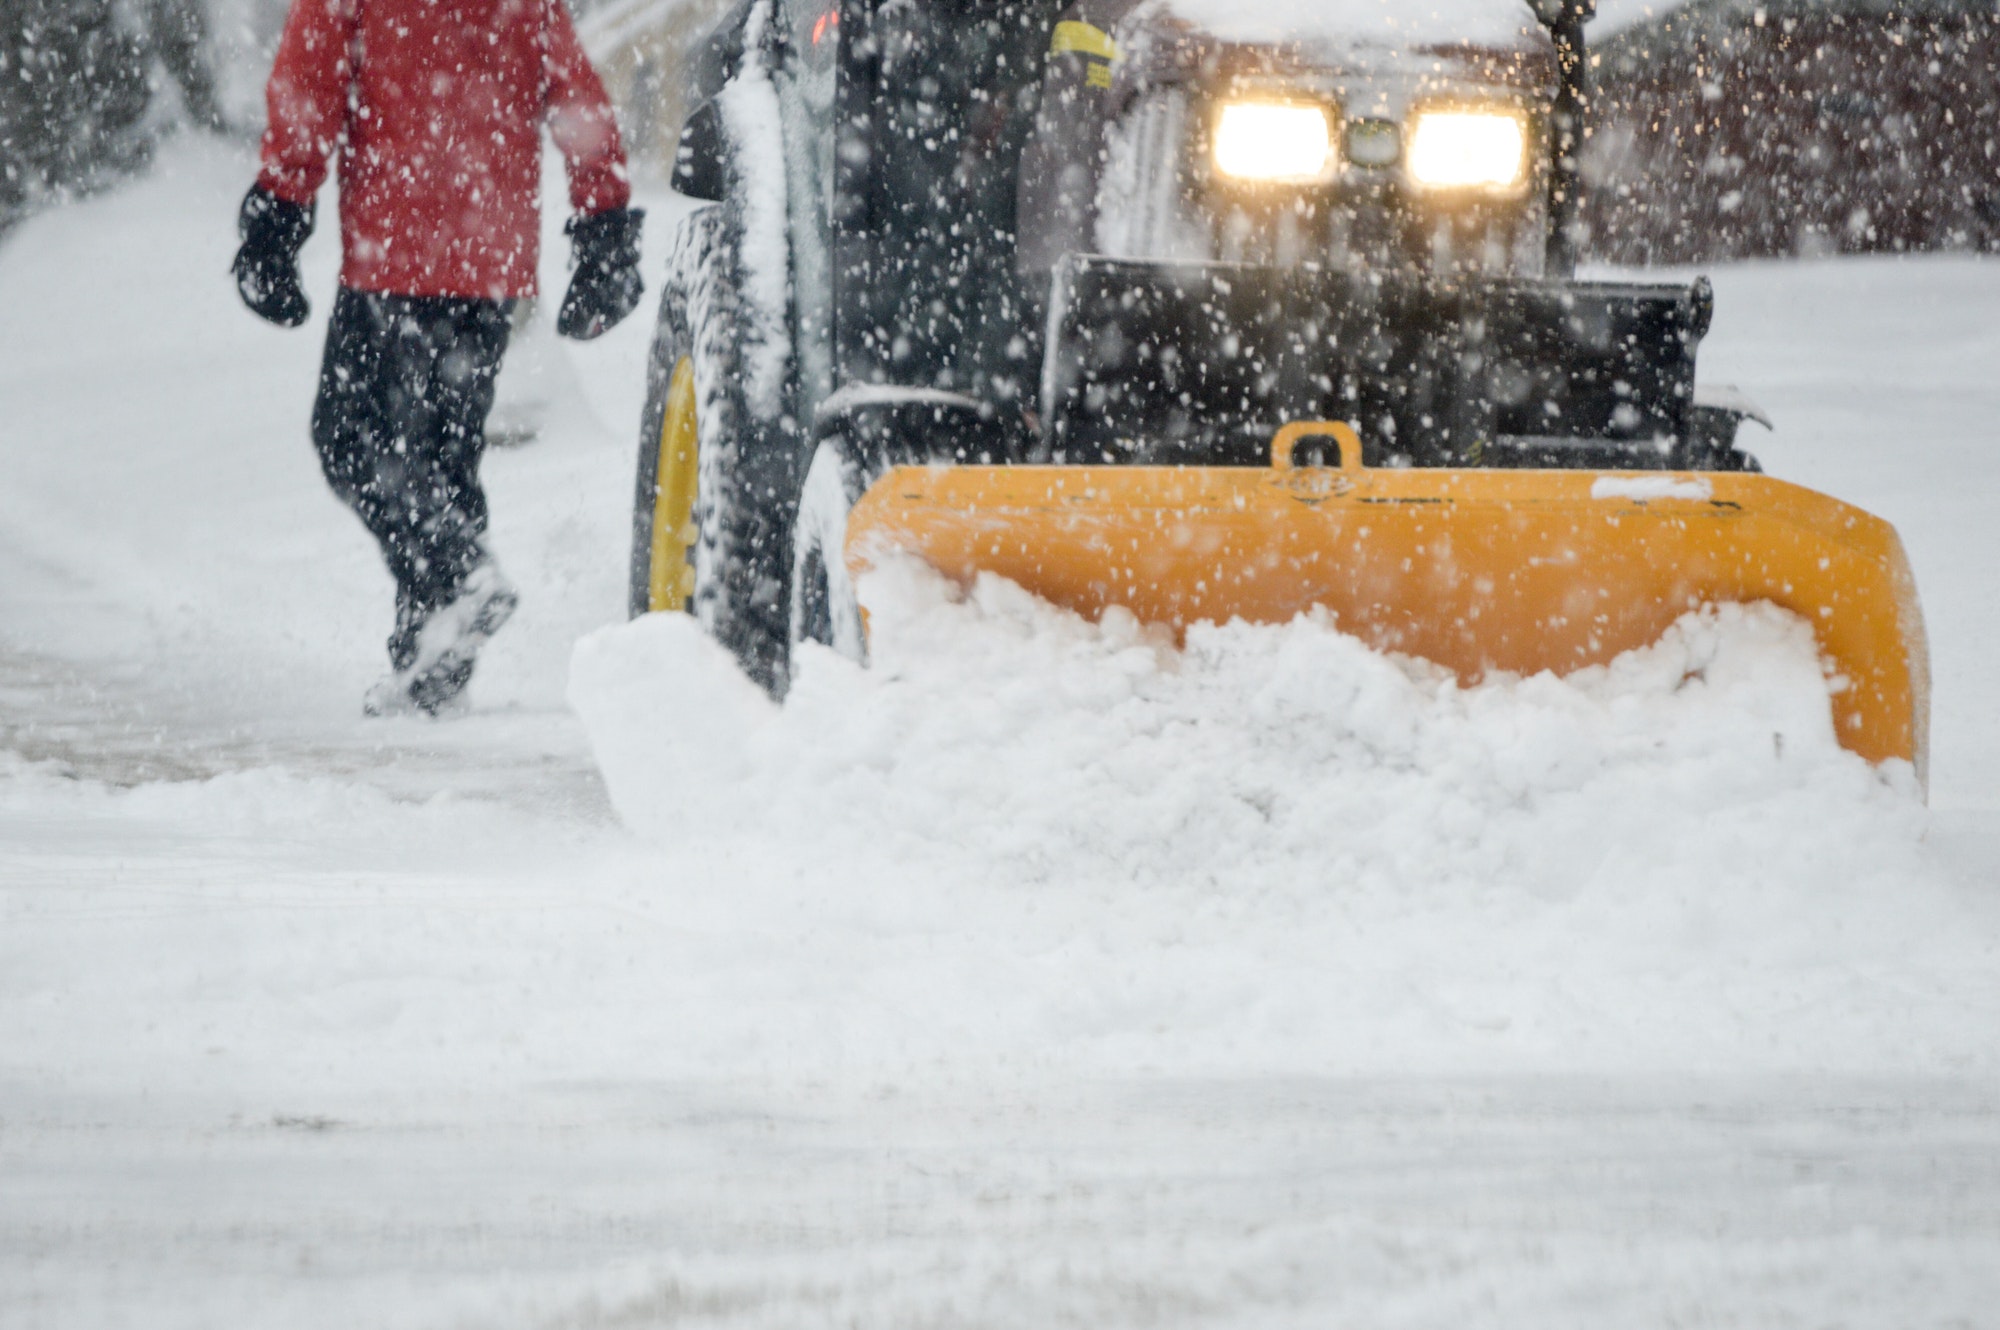 A person walking in a Snowstorm with a snow plow clearing street in heavy snow fall urban winter